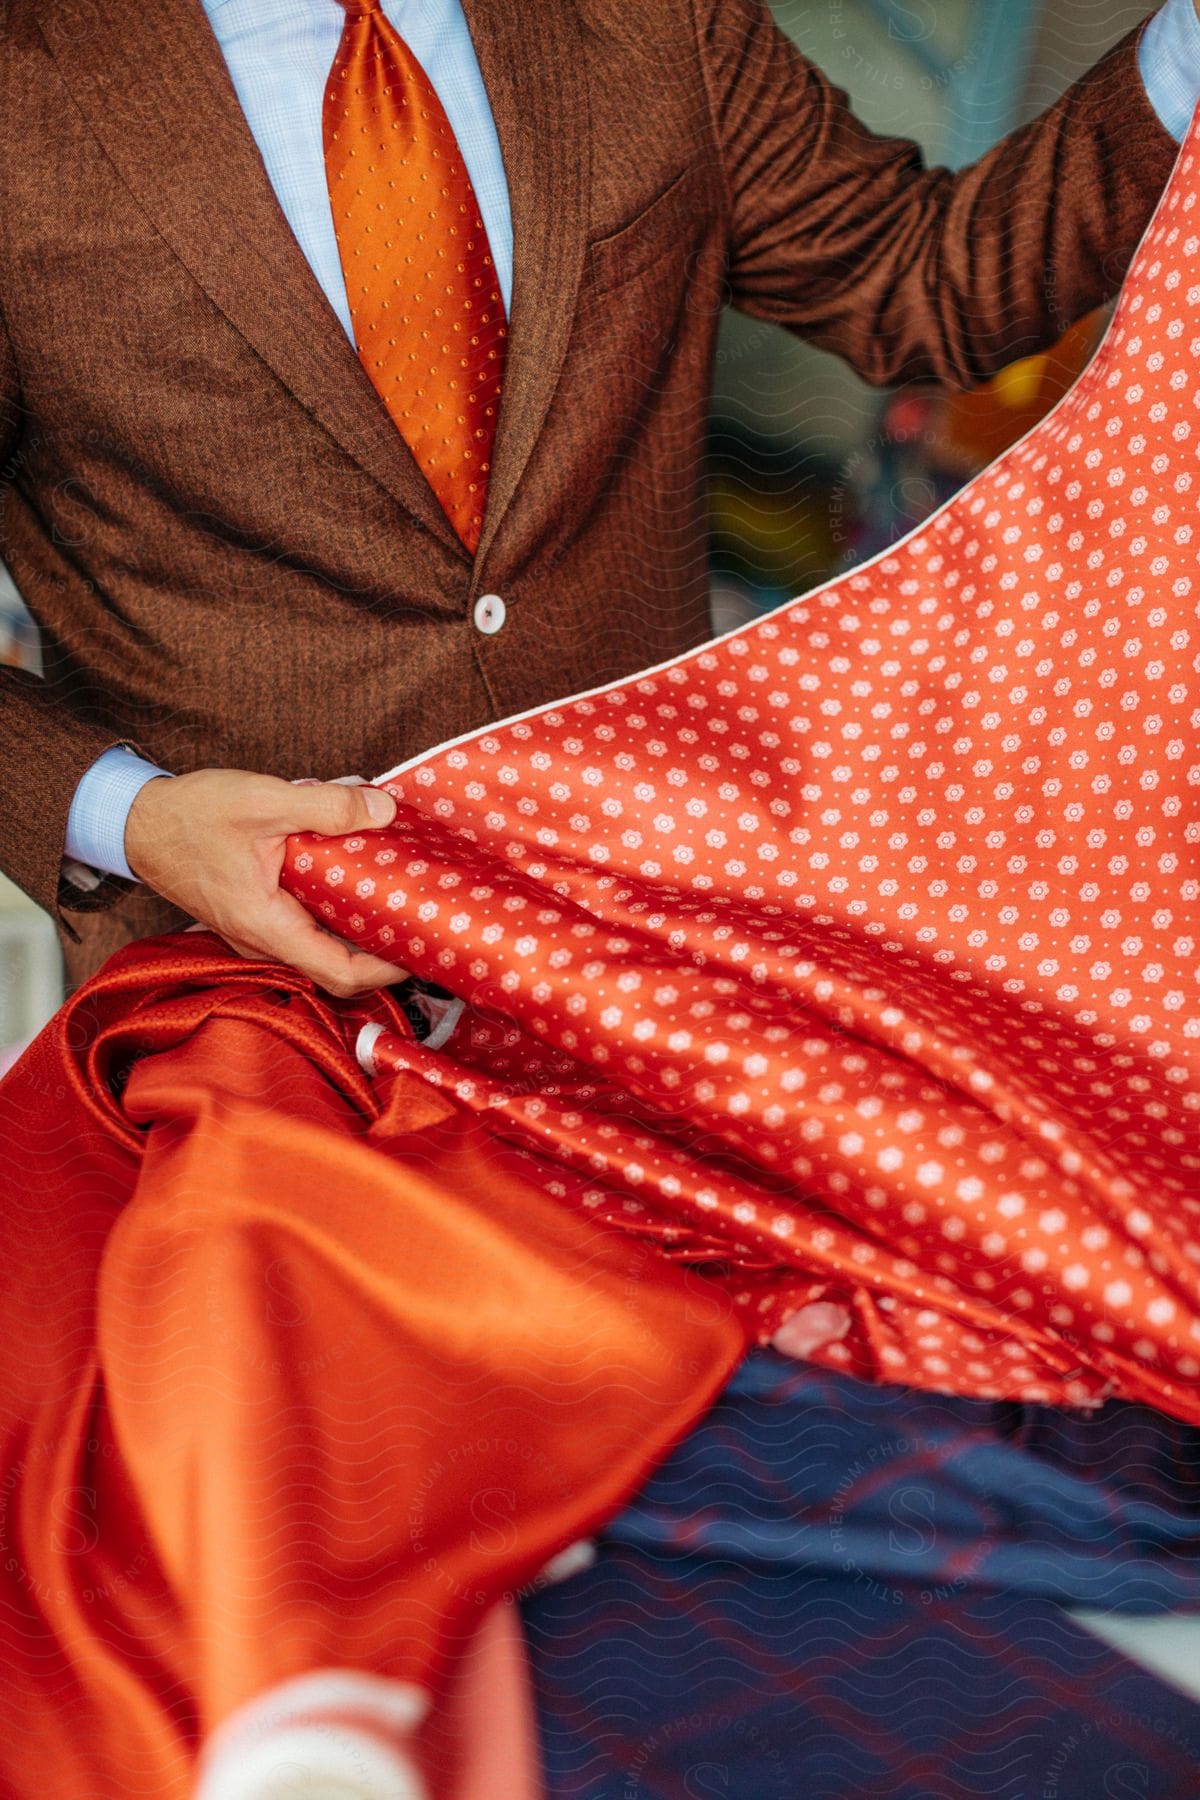 A man in a brown suit holds orange polka dot fabric